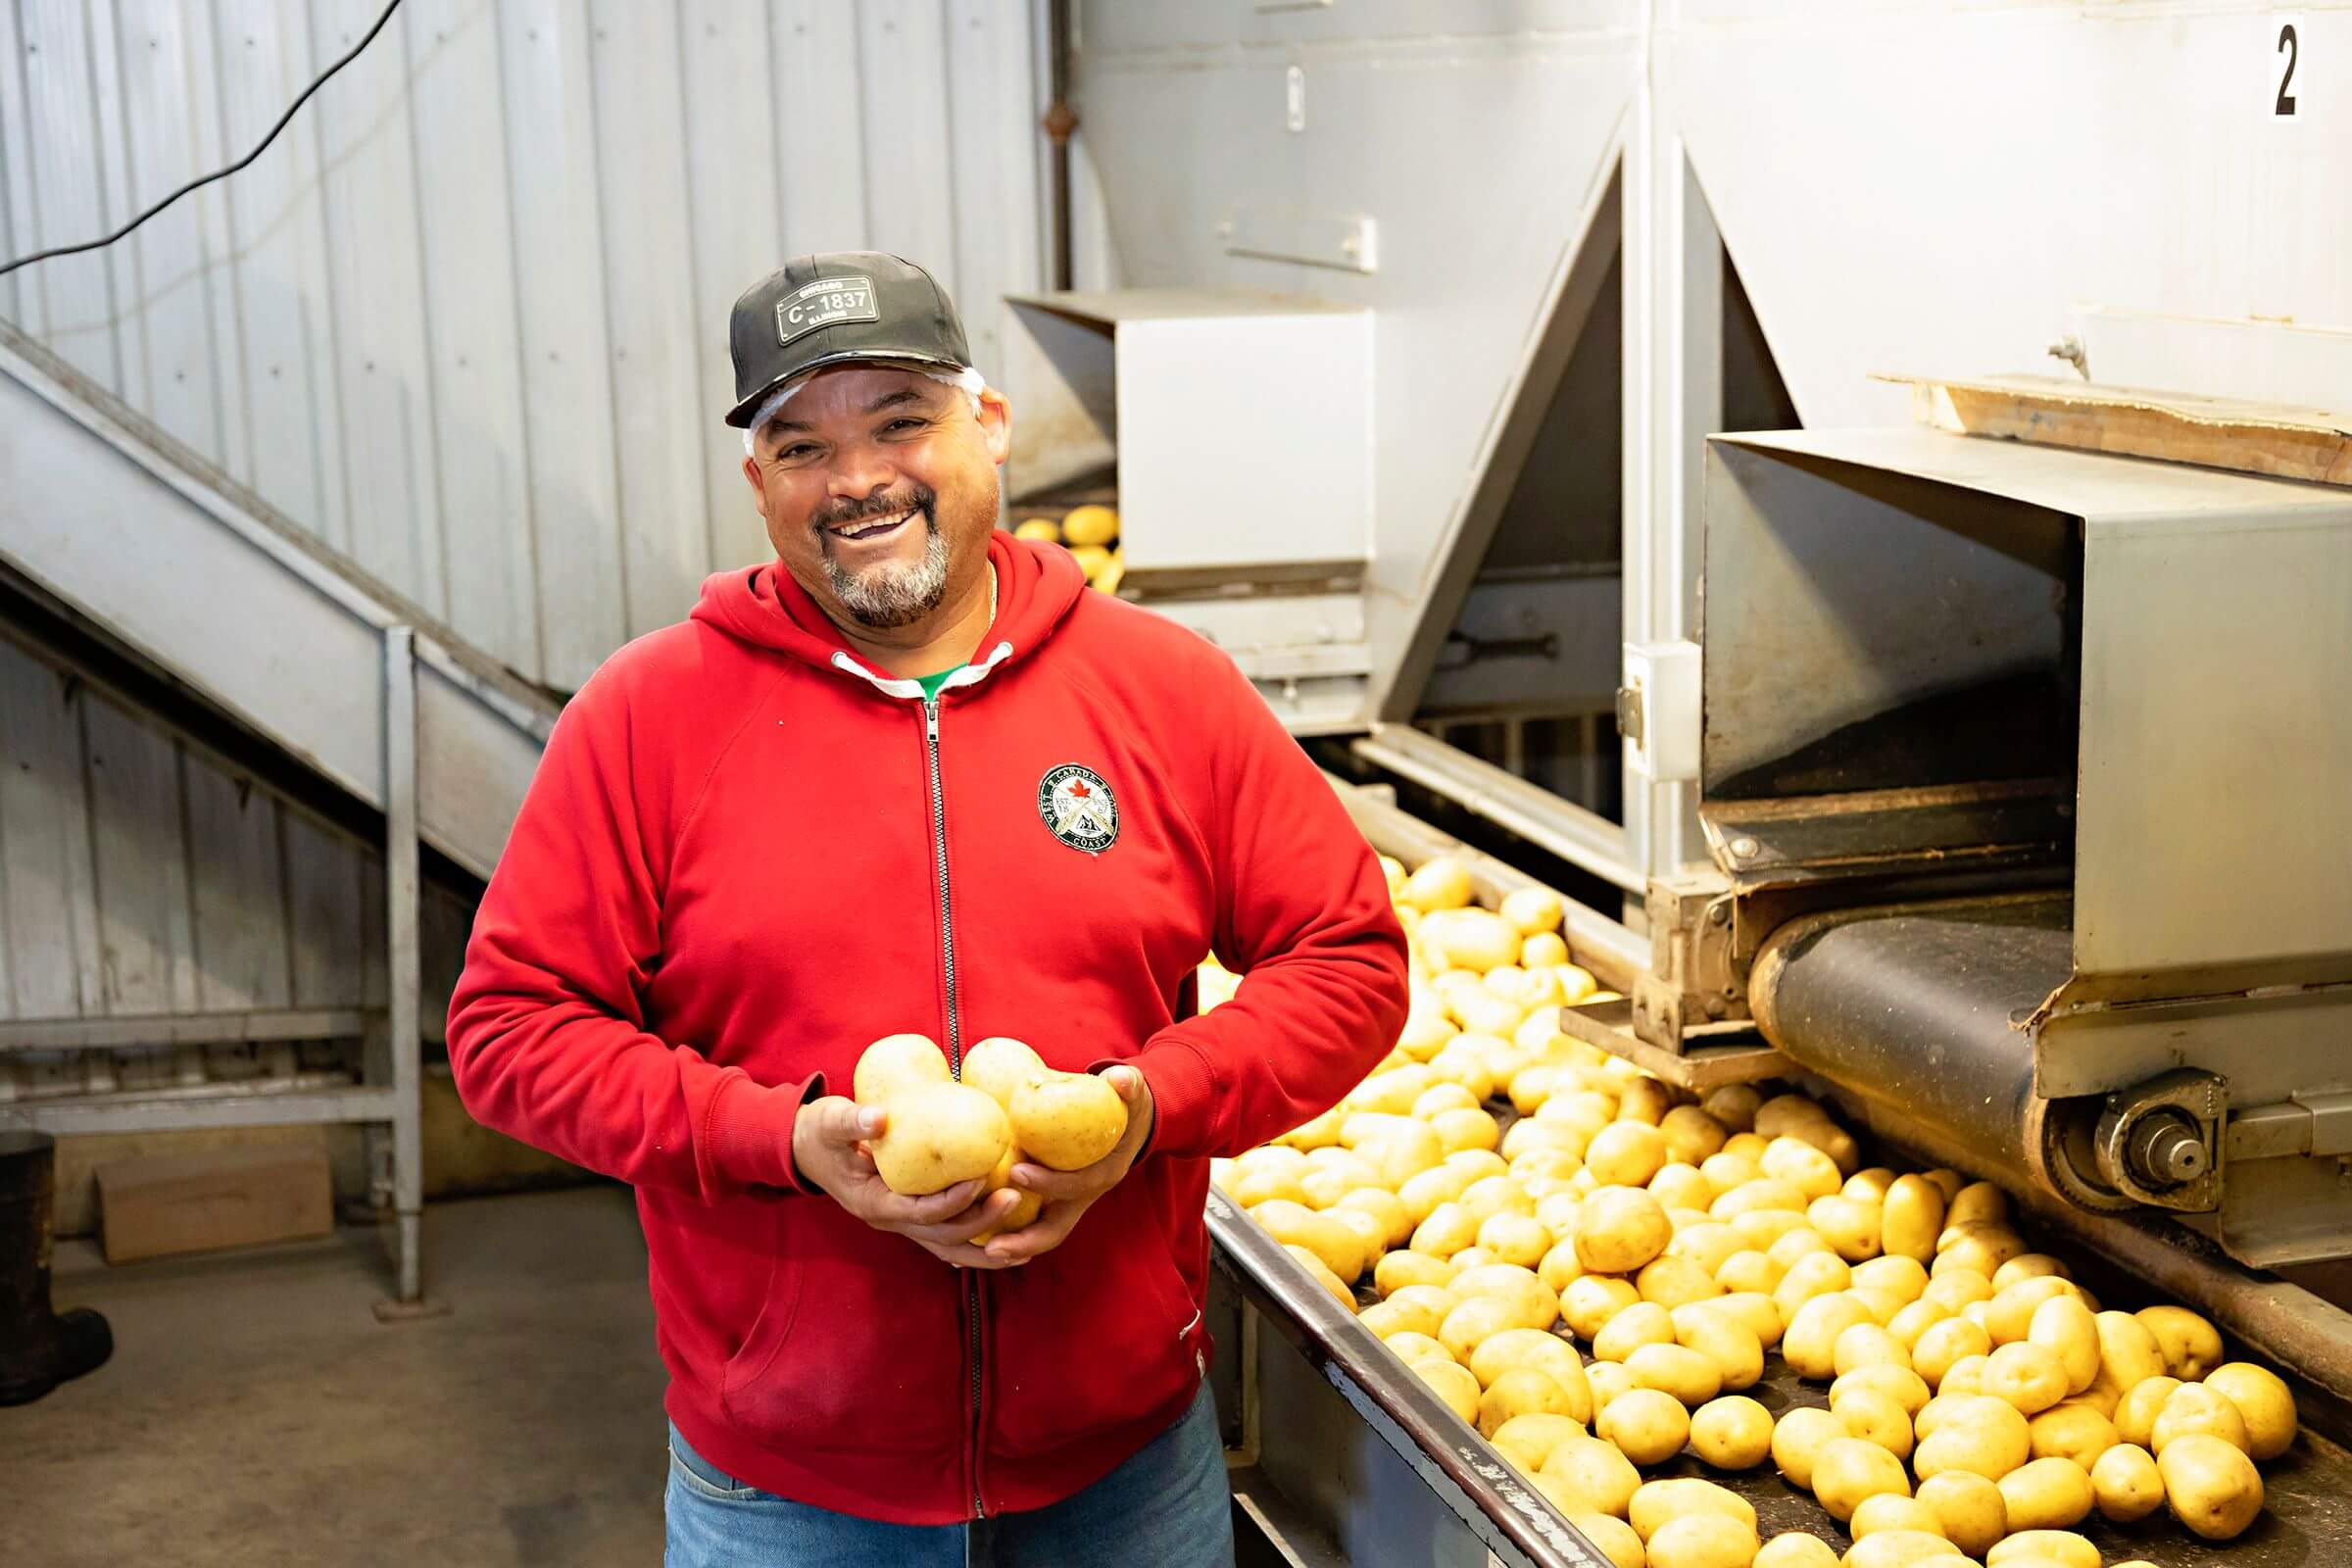 Meet Gerardo, Seasonal Agricultural Worker from Mexico